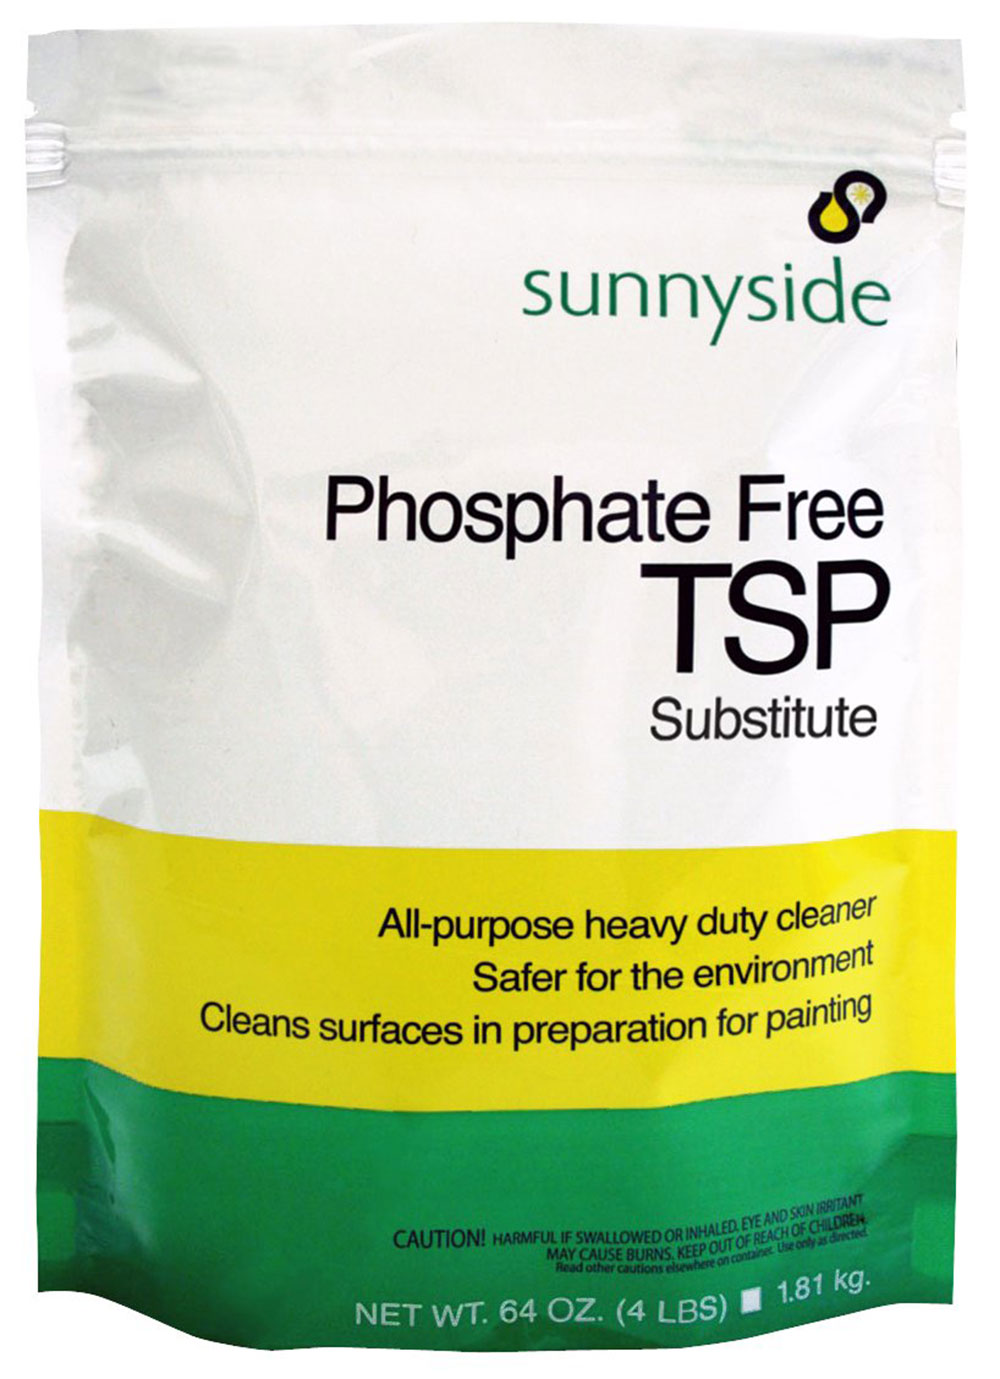 Phosphate-Free-TSP-substitute What can I use instead of trisodium phosphate?